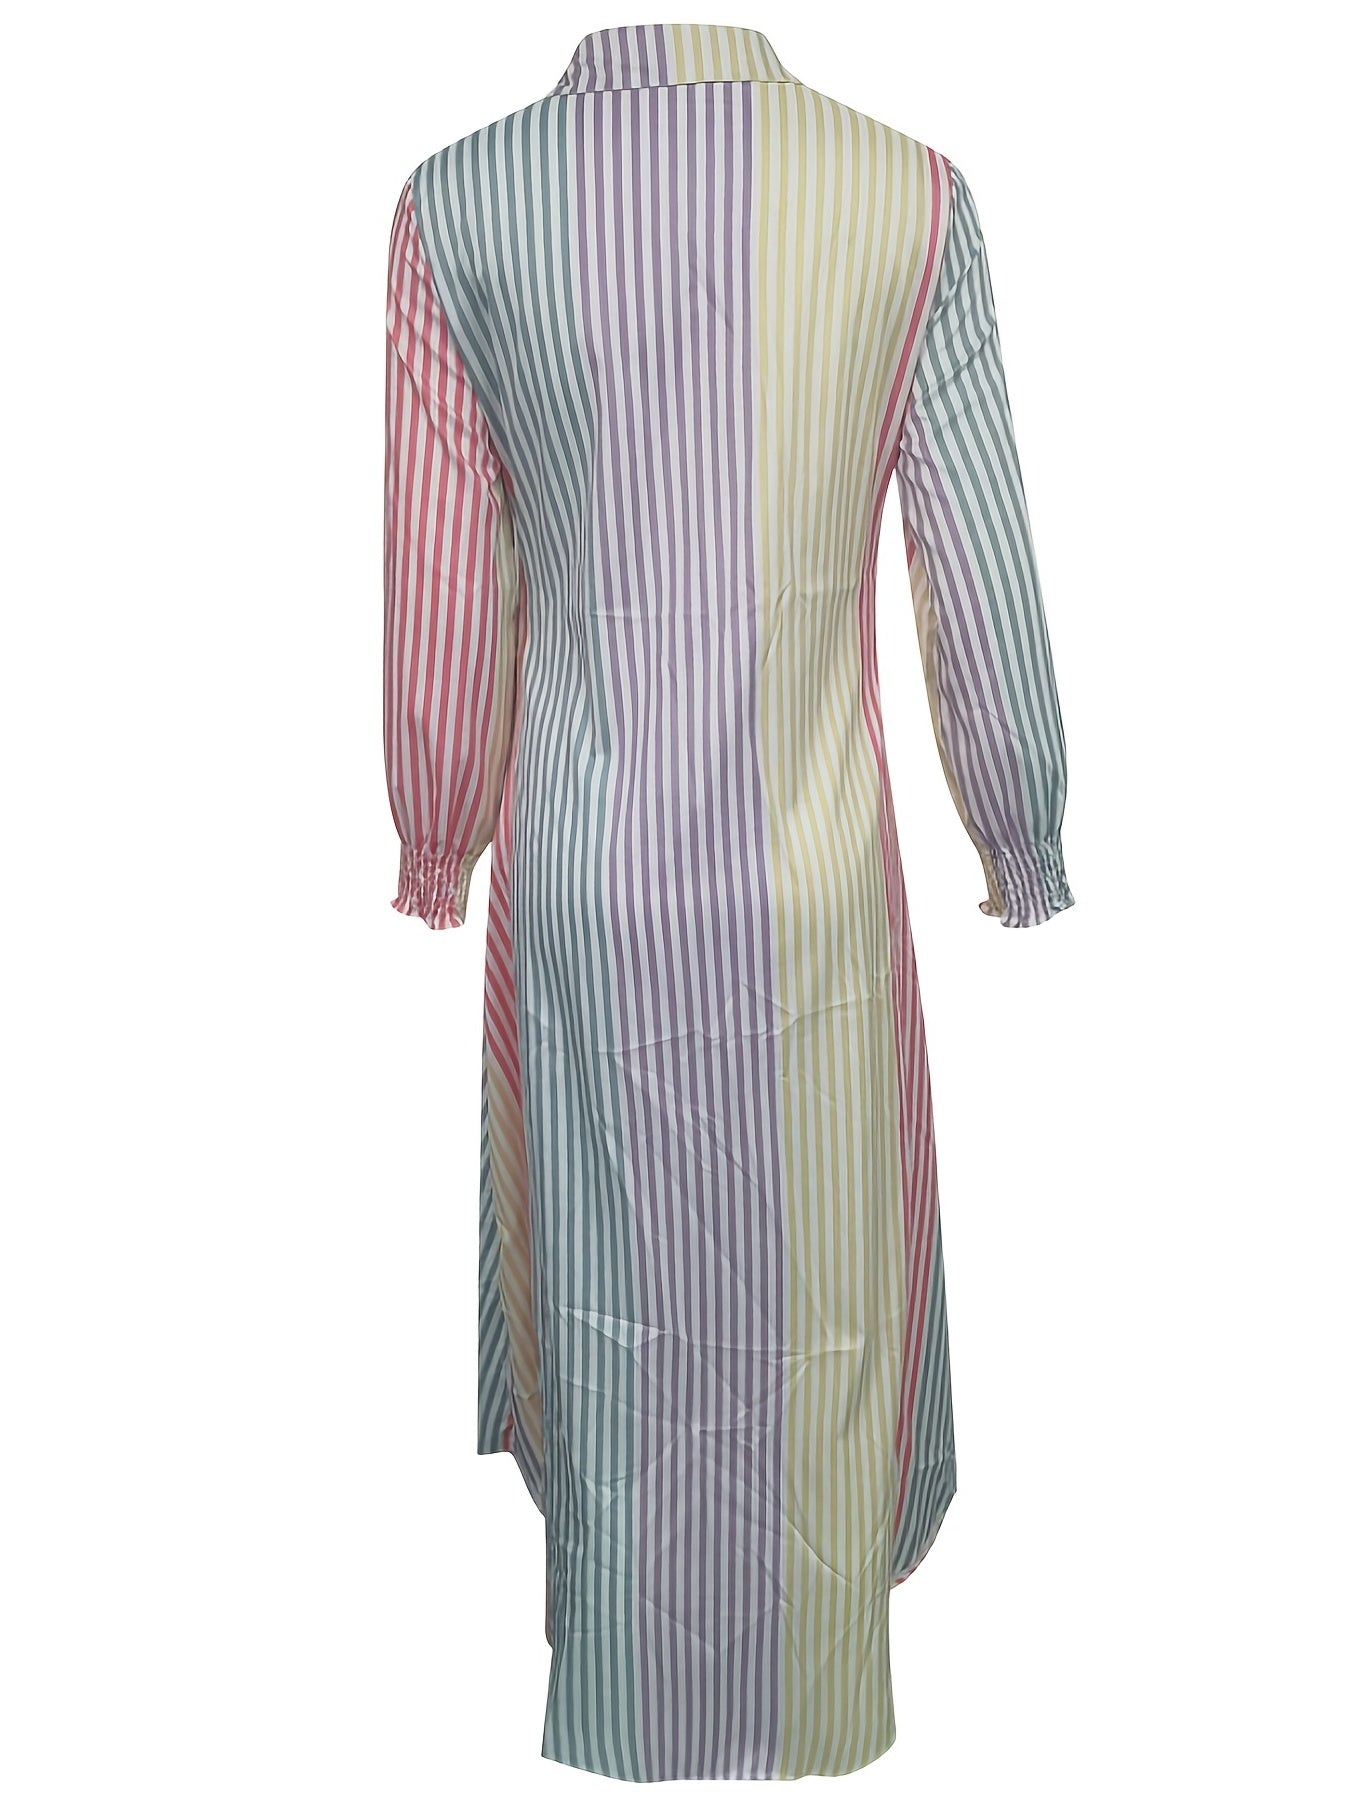 「binfenxie」Color Block Striped Shirt Dress, Casual Long Sleeve Button Down Ankle Dress, Women's Clothing